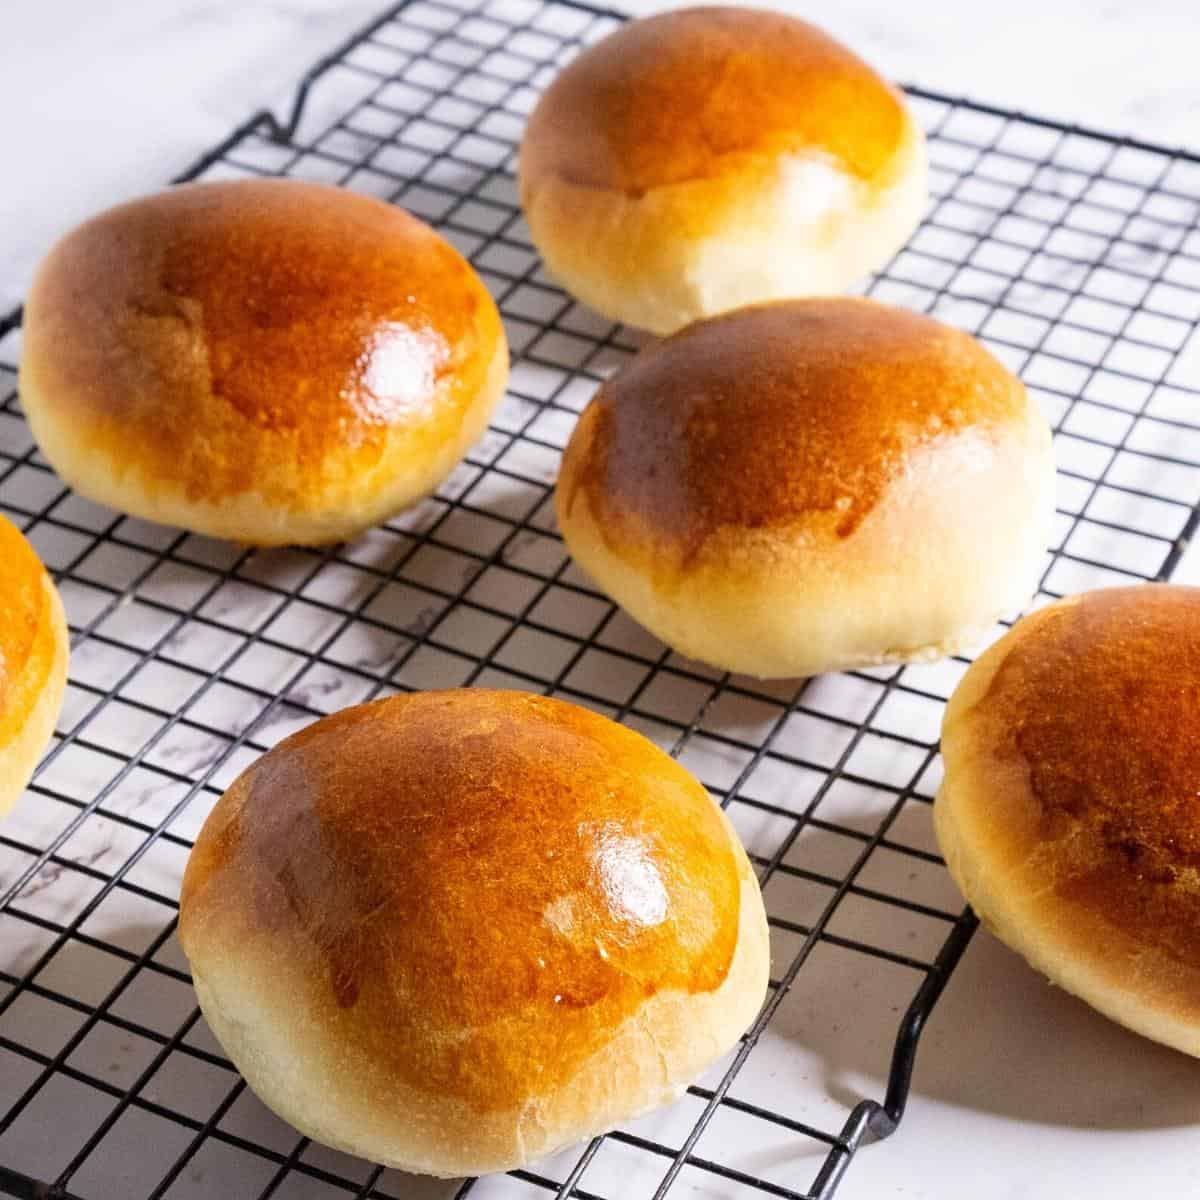 Buns on the wire rack made with sourdough.